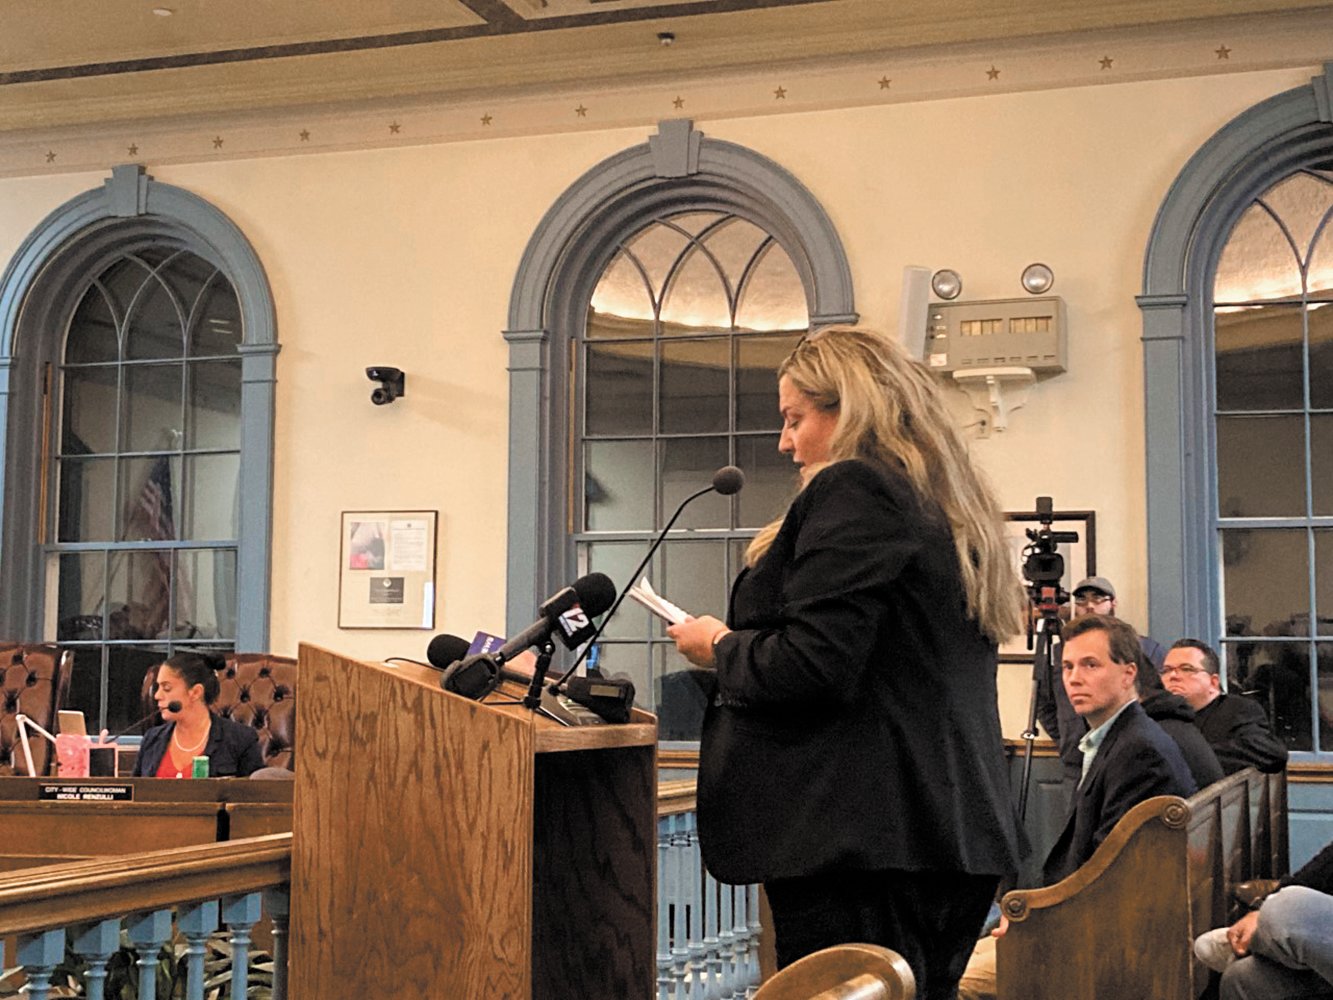 425 INDIVIDUALS: Jennifer Barrera, Chief Strategy Officer of the Rhode Island Coalition to End Homelessness, shared that 425 Rhode Islanders were experiencing homelessness Thursday night.